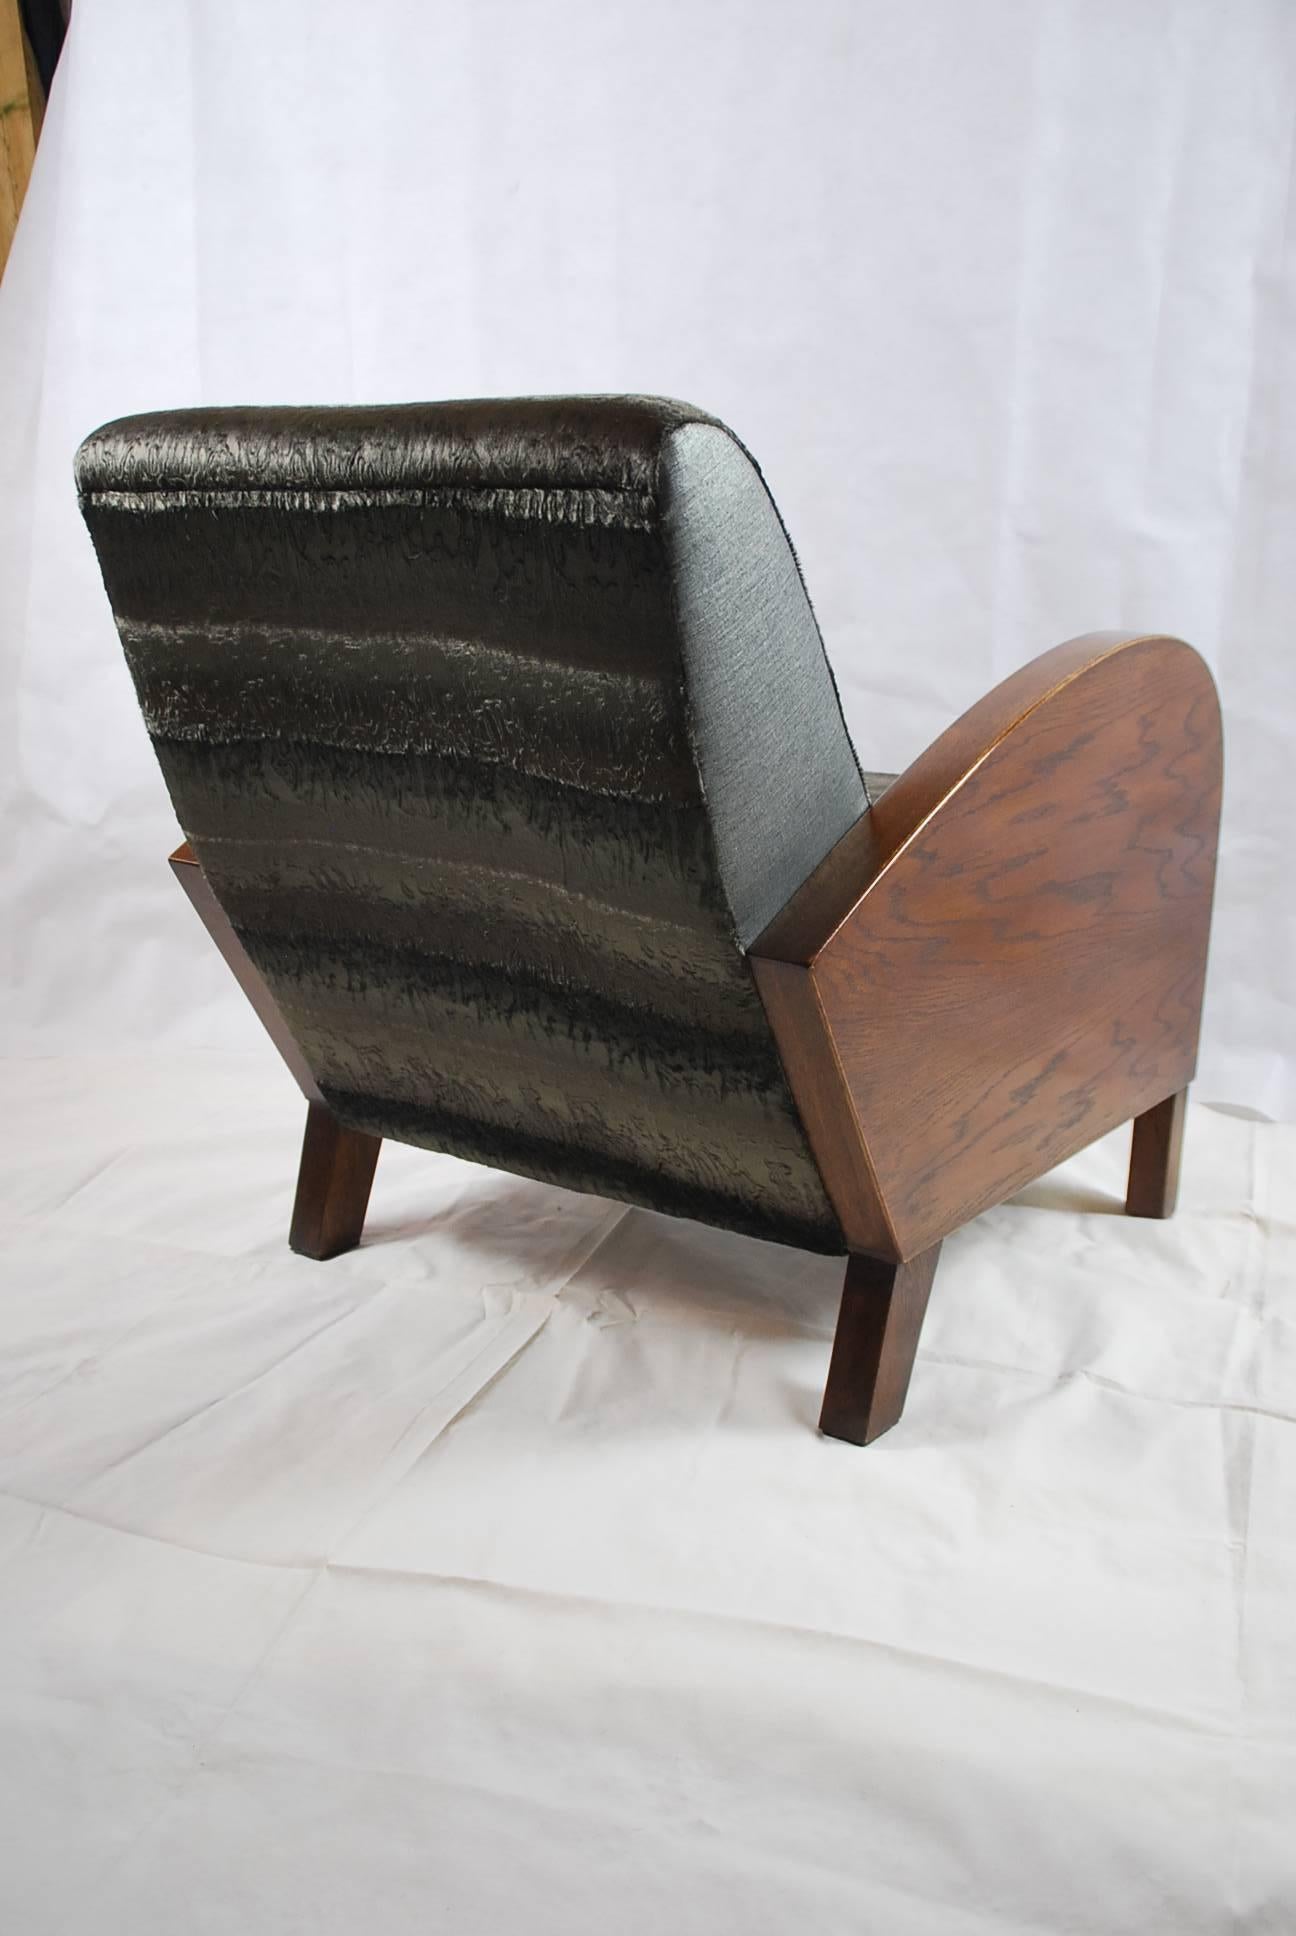 Upholstery Custom-Made circa 1950s for Director of One of the Olomouc Company, Czech For Sale